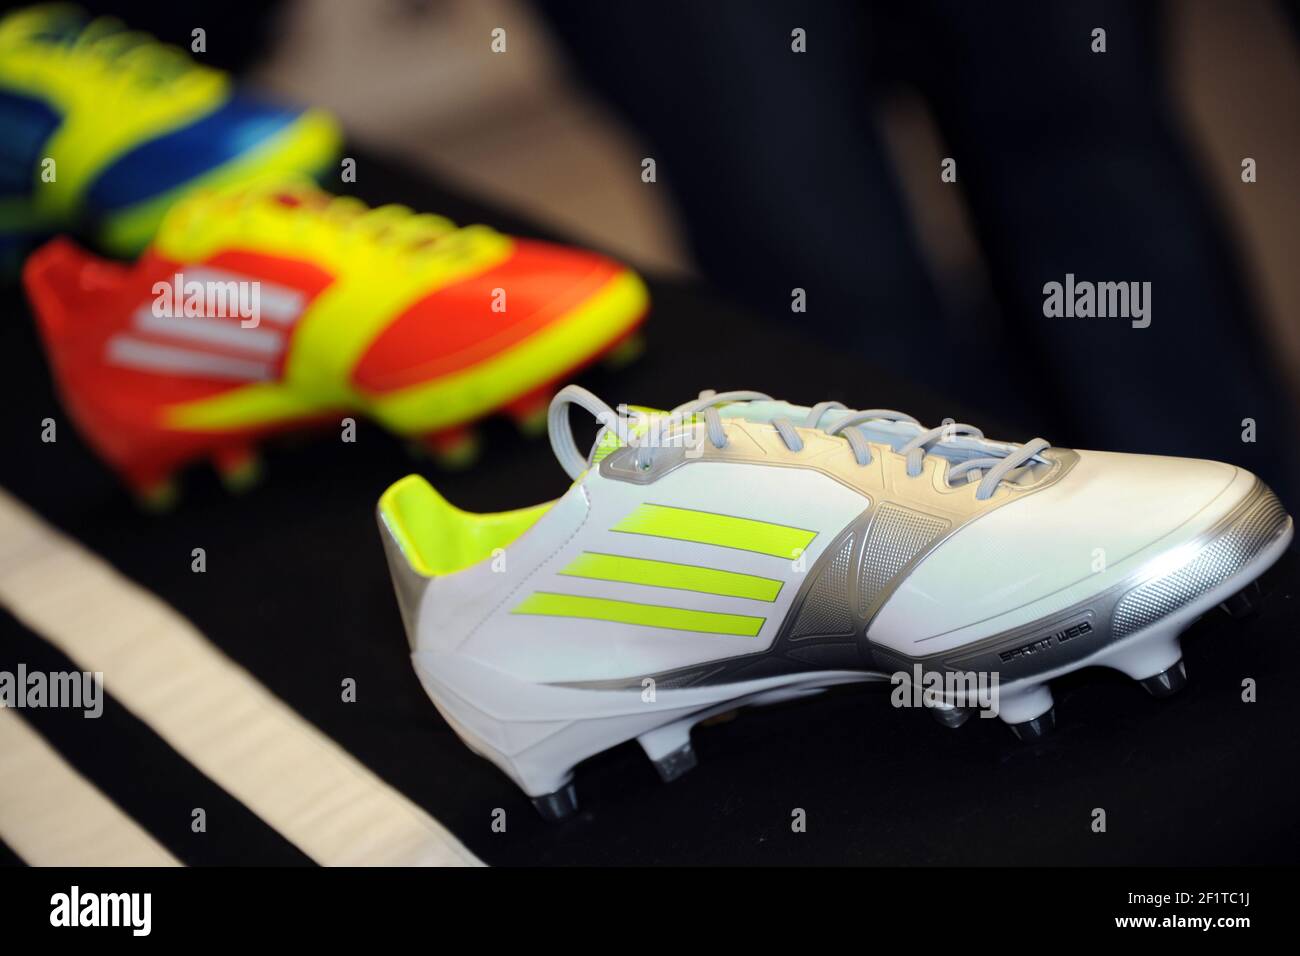 Adidas F50 High Resolution Stock Photography and Images - Alamy